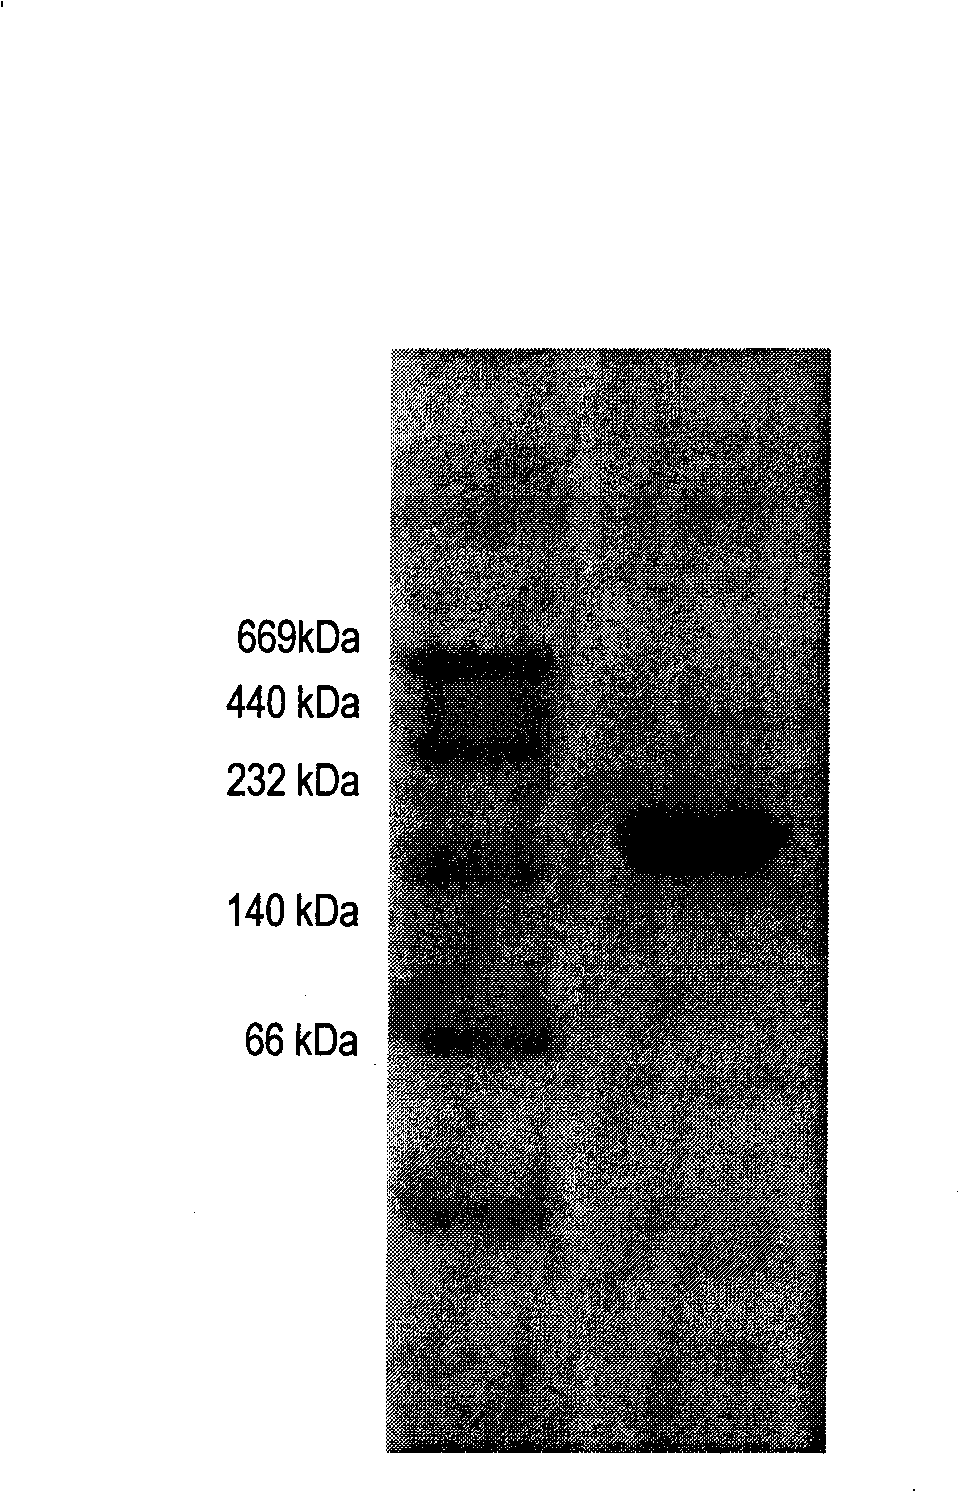 Arthrobacter, uses for produced xanthine oxidase and production method thereof